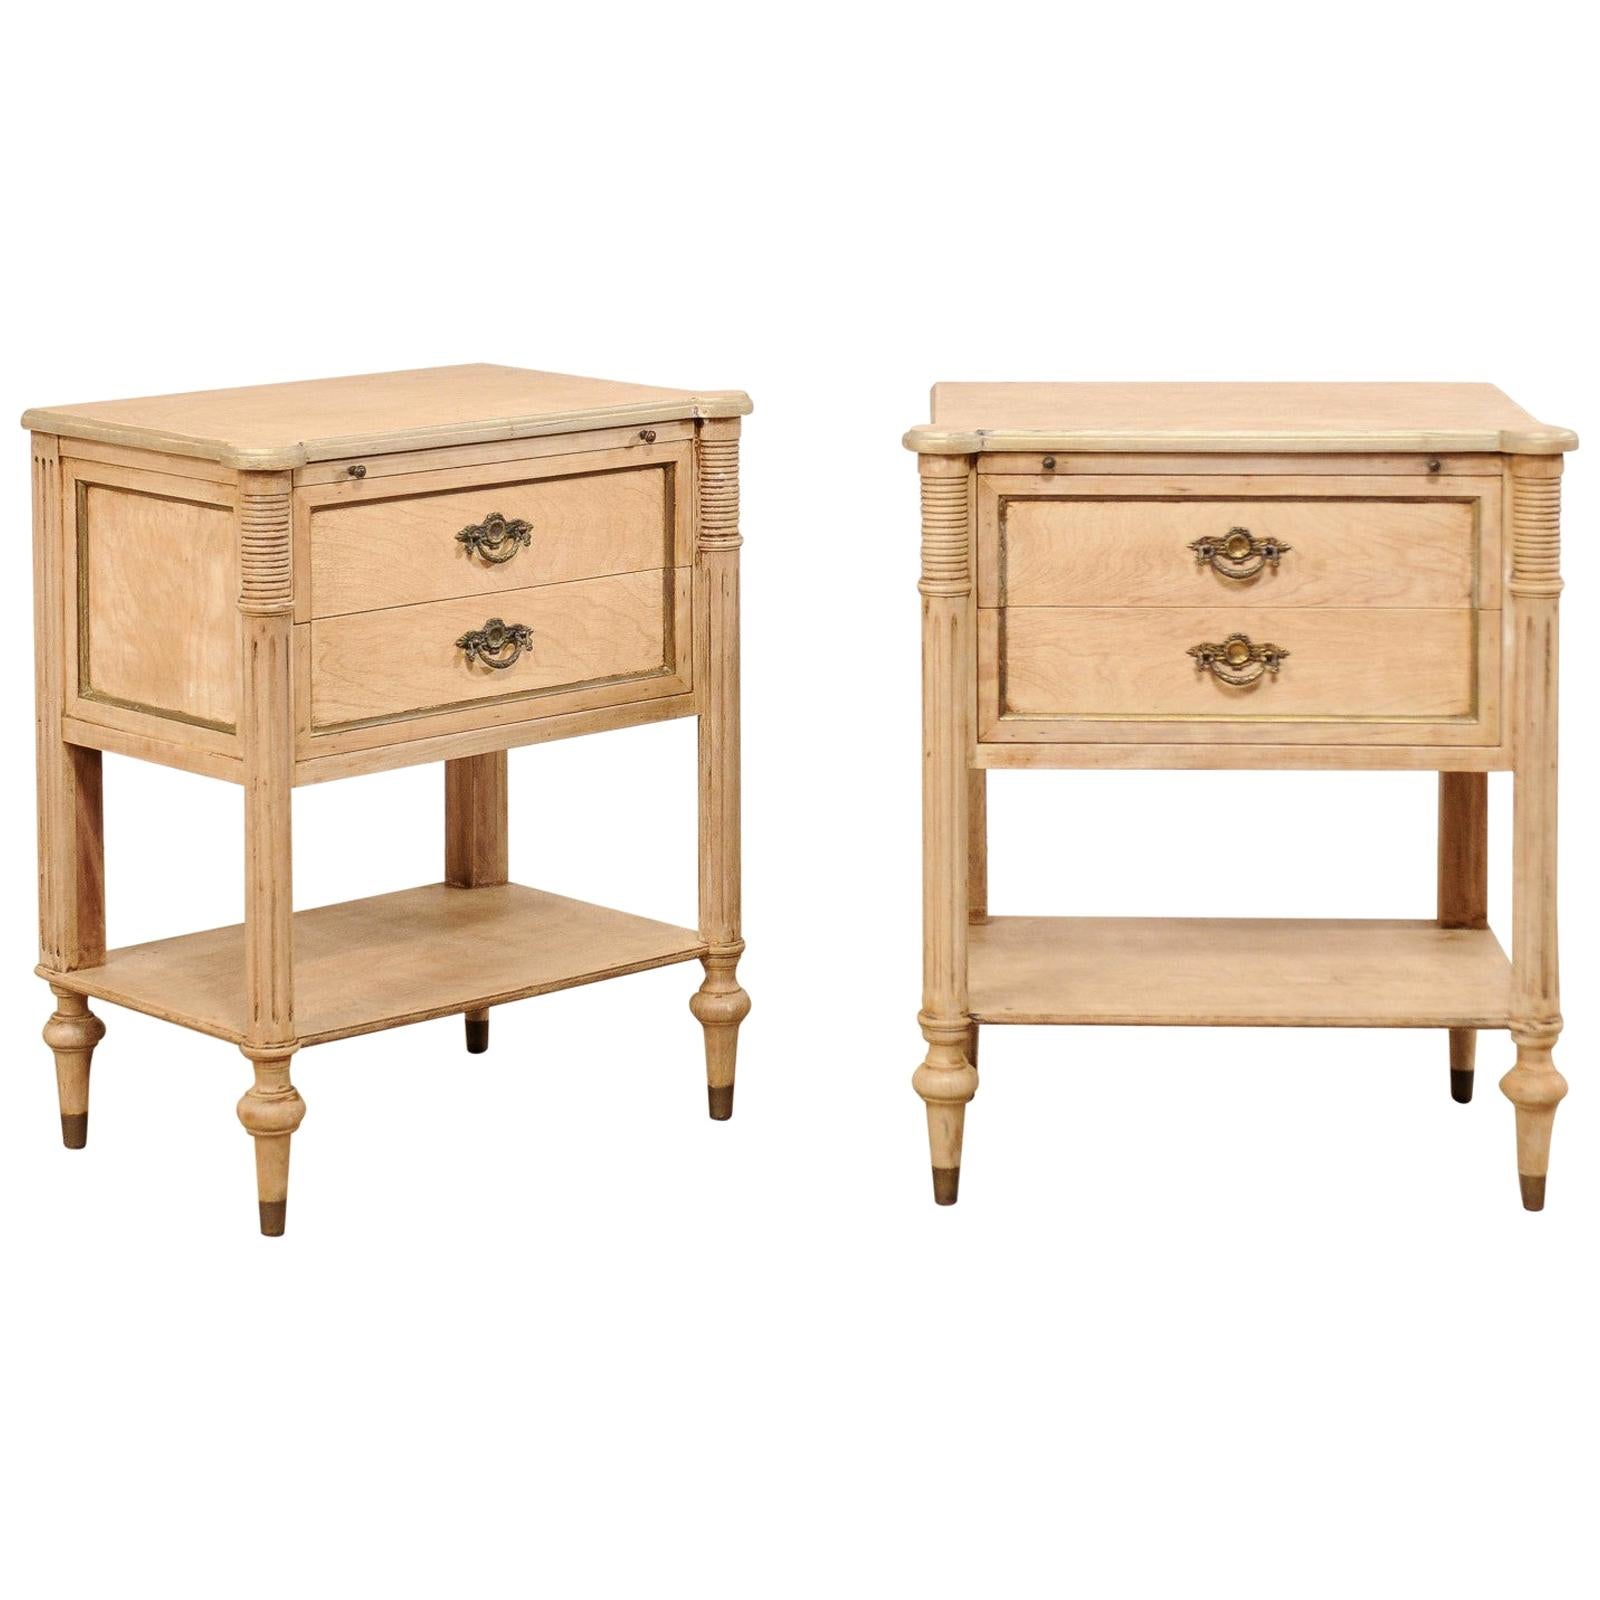 Pair of Mid-20th Century American Carved Wood Nightstands